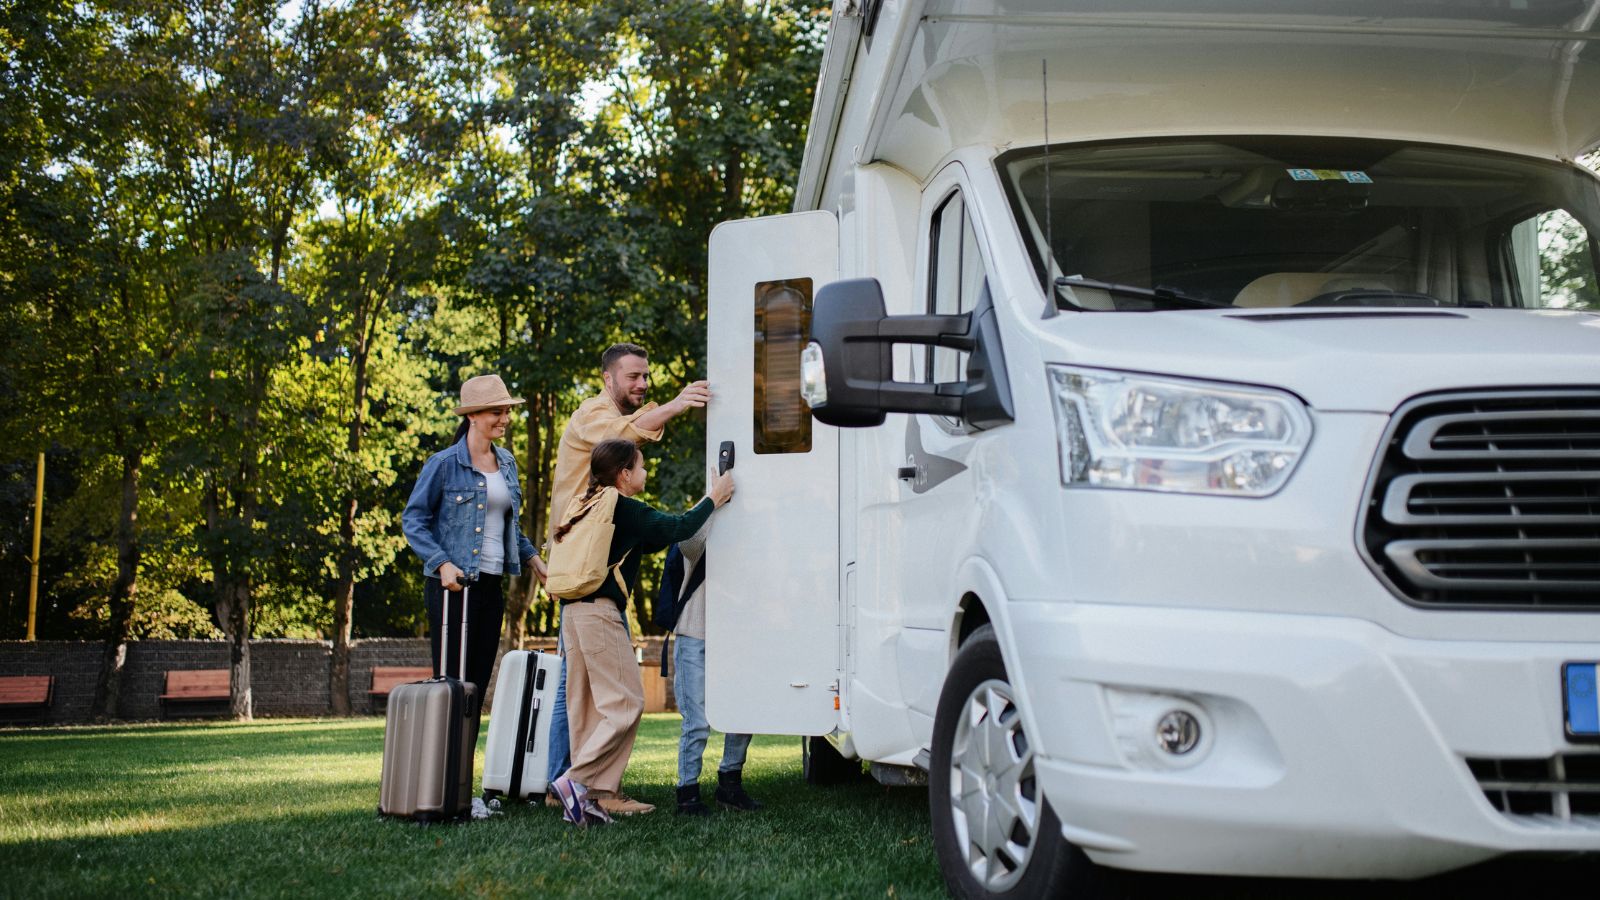 <p>Full-time RV living continues to grow in popularity, with more and more people seeking an escape from the daily grind. However, making the transition to RV life isn’t easy.</p> <p>If you’re considering an RV lifestyle, one of the important questions you need to answer is: How much does it cost to live in an RV?</p> <p>If so, you’re in luck! In today’s slideshow, we’ll explore the costs of RV life so you can work out the best budget for you.</p> <p>Let’s dive straight in!</p>